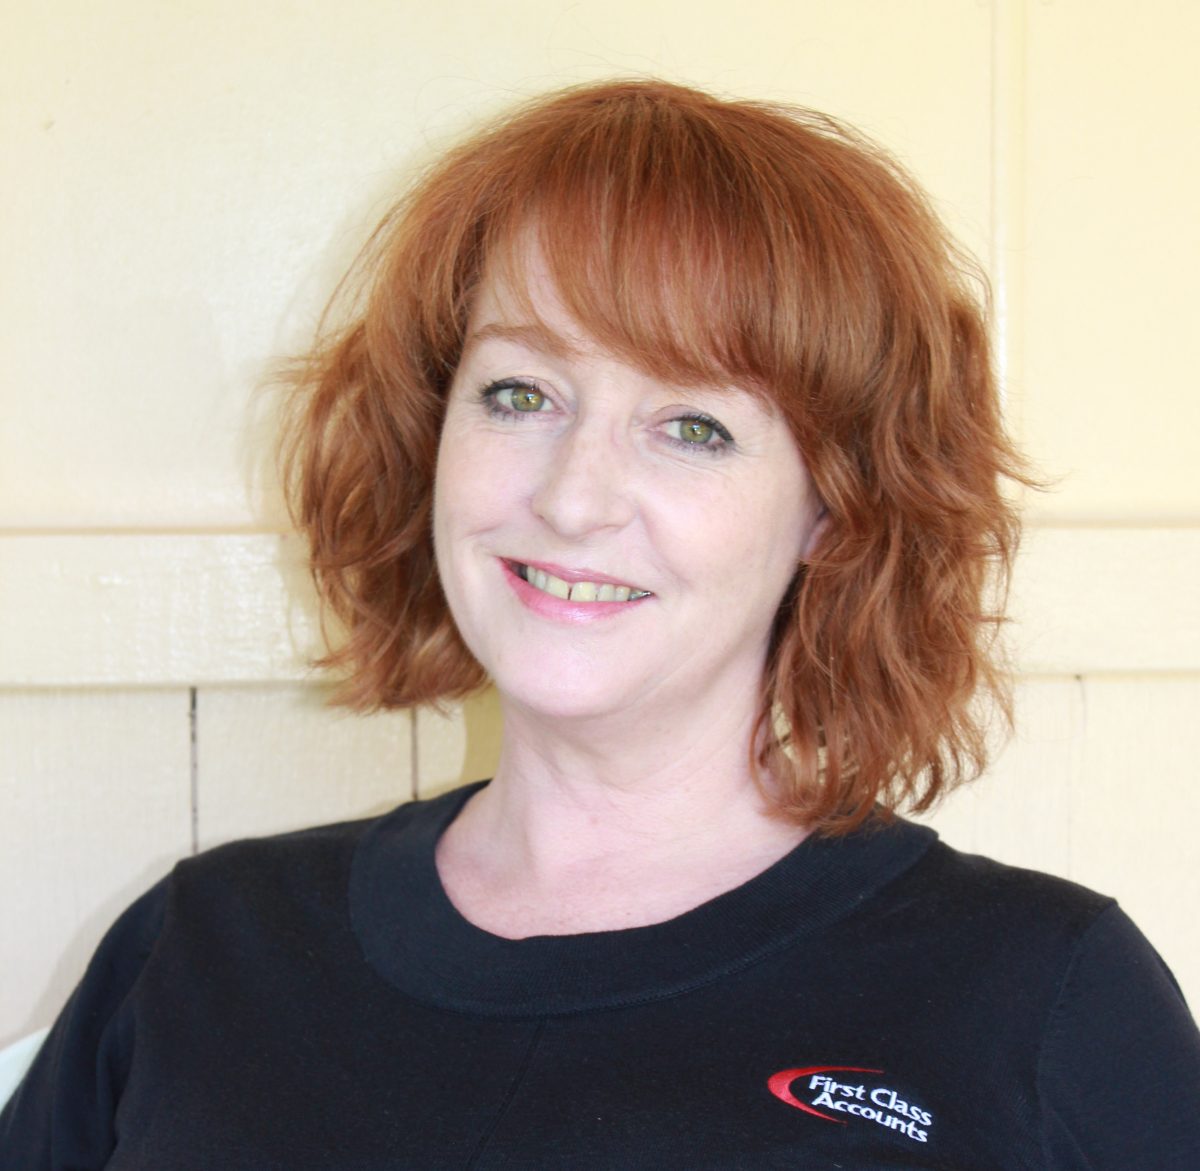 Tracey Howe, Bookkeeper from First Class Accounts Coolangatta